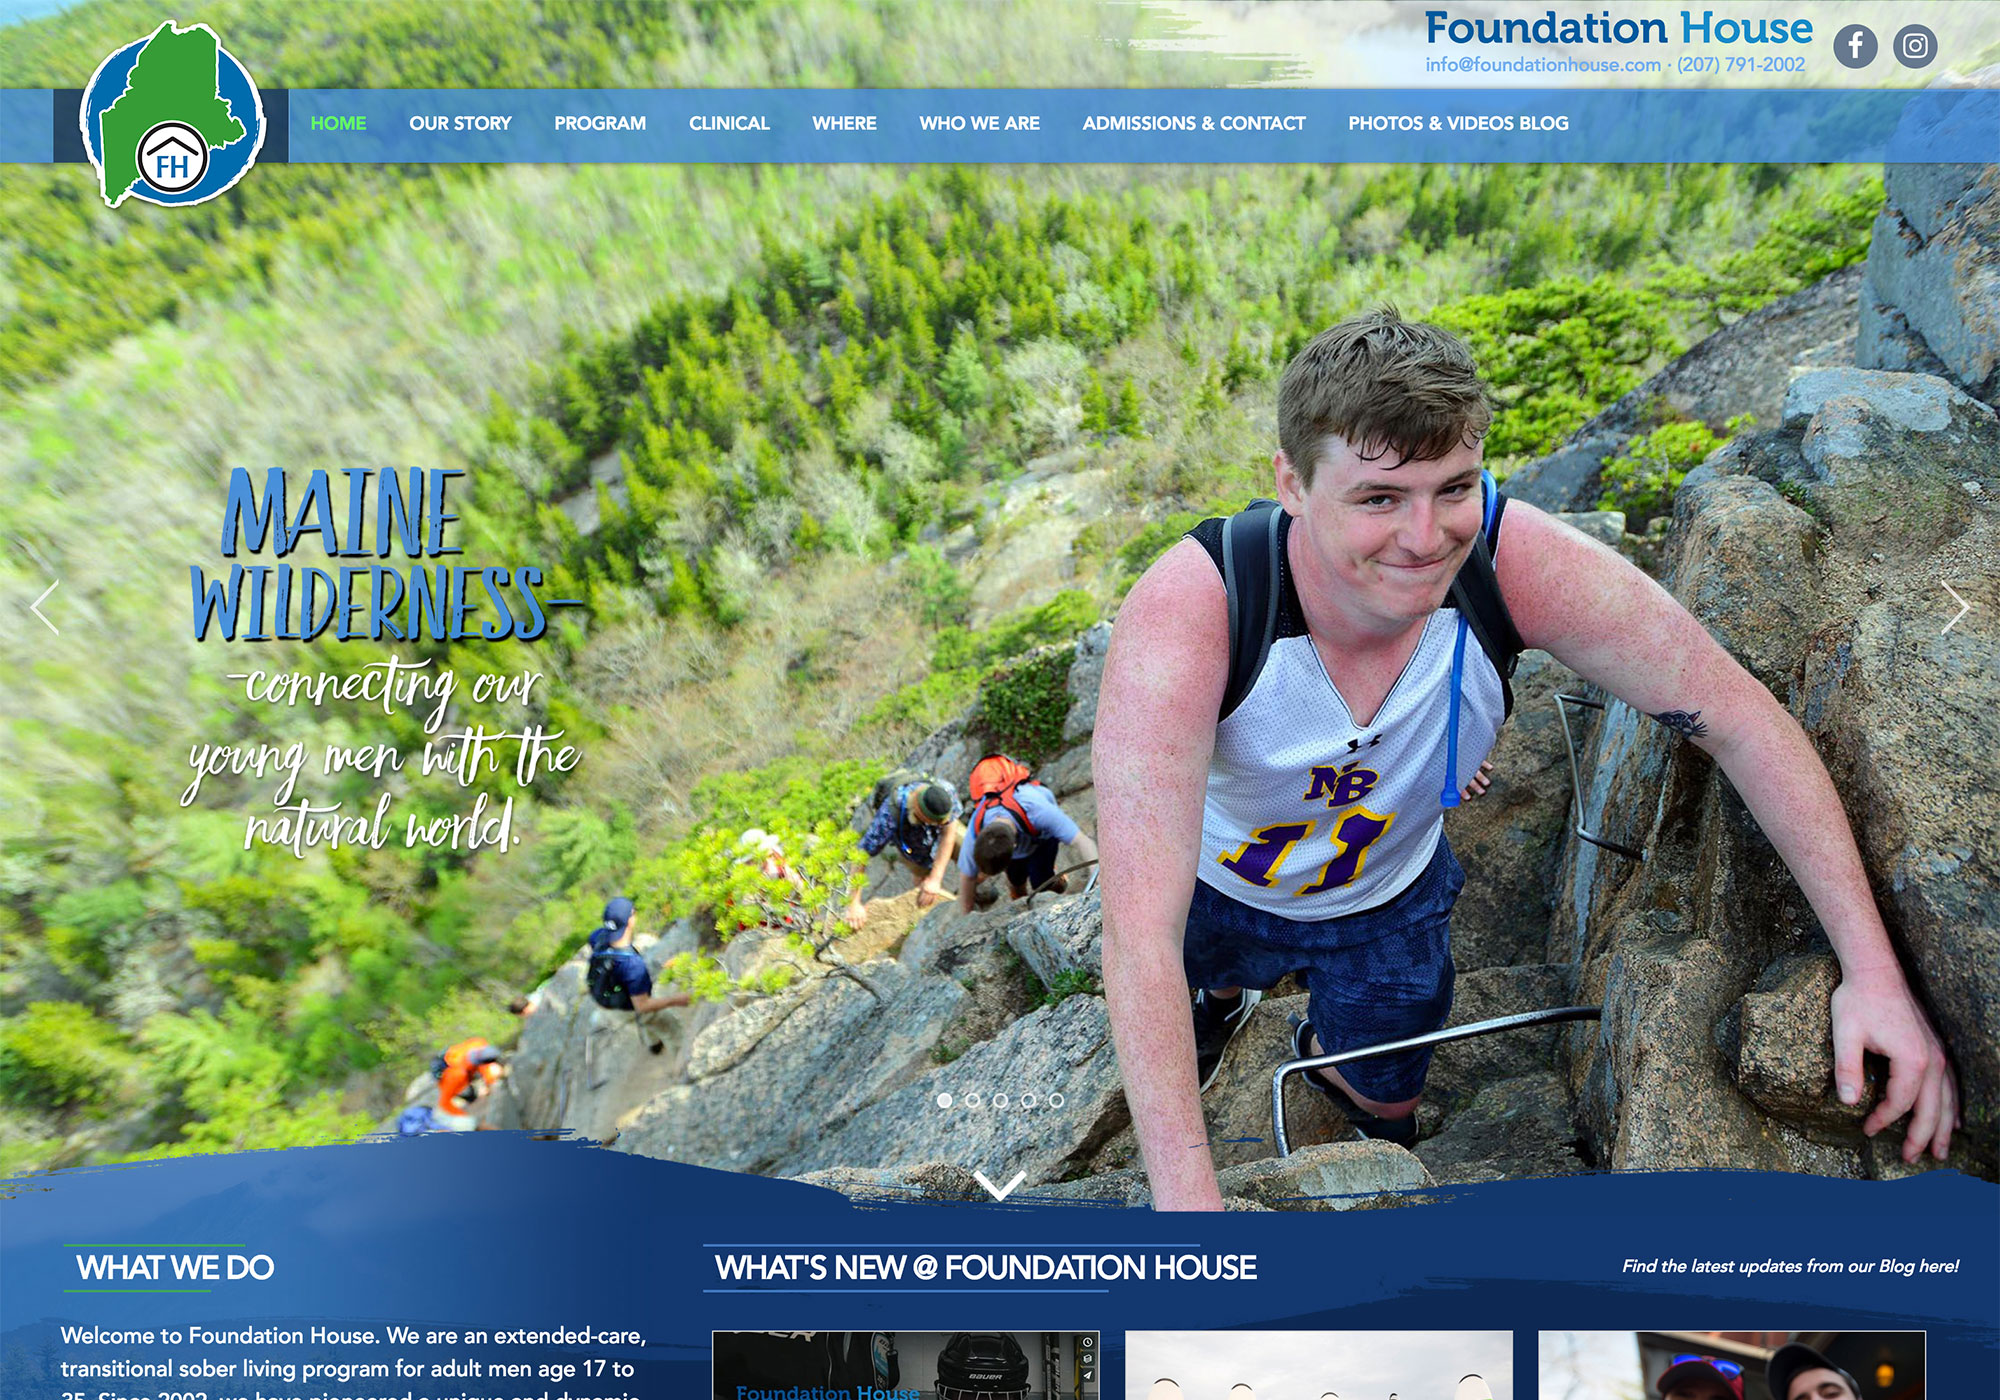 A screenshot of the SlickFish Studios designed and developed website for Foundation House in Portland, Maine